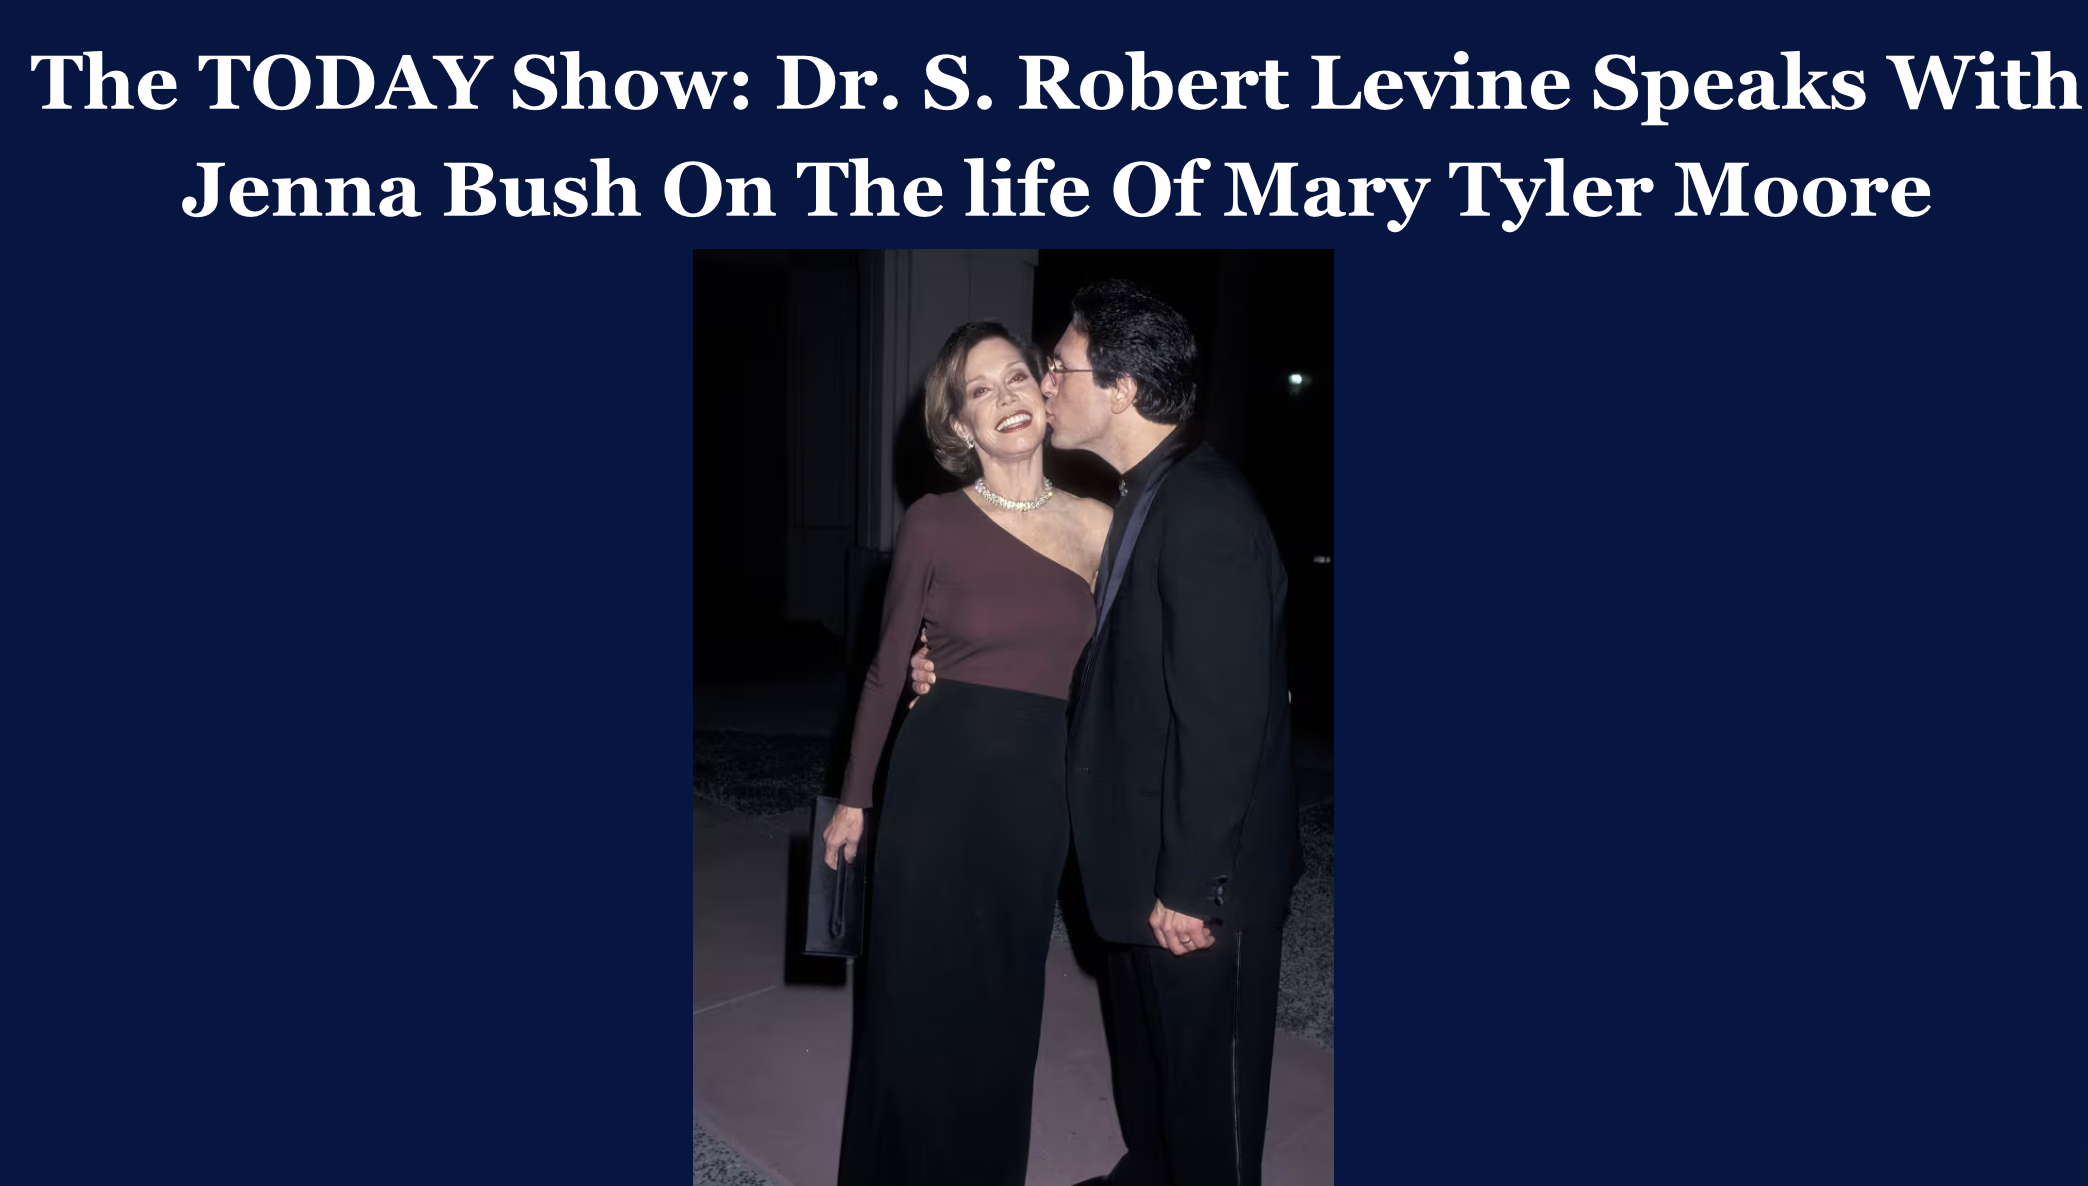 TODAY Show: Dr. S. Robert Levine Speaks with Jenna Bush on the Life of Mary Tyler Moore